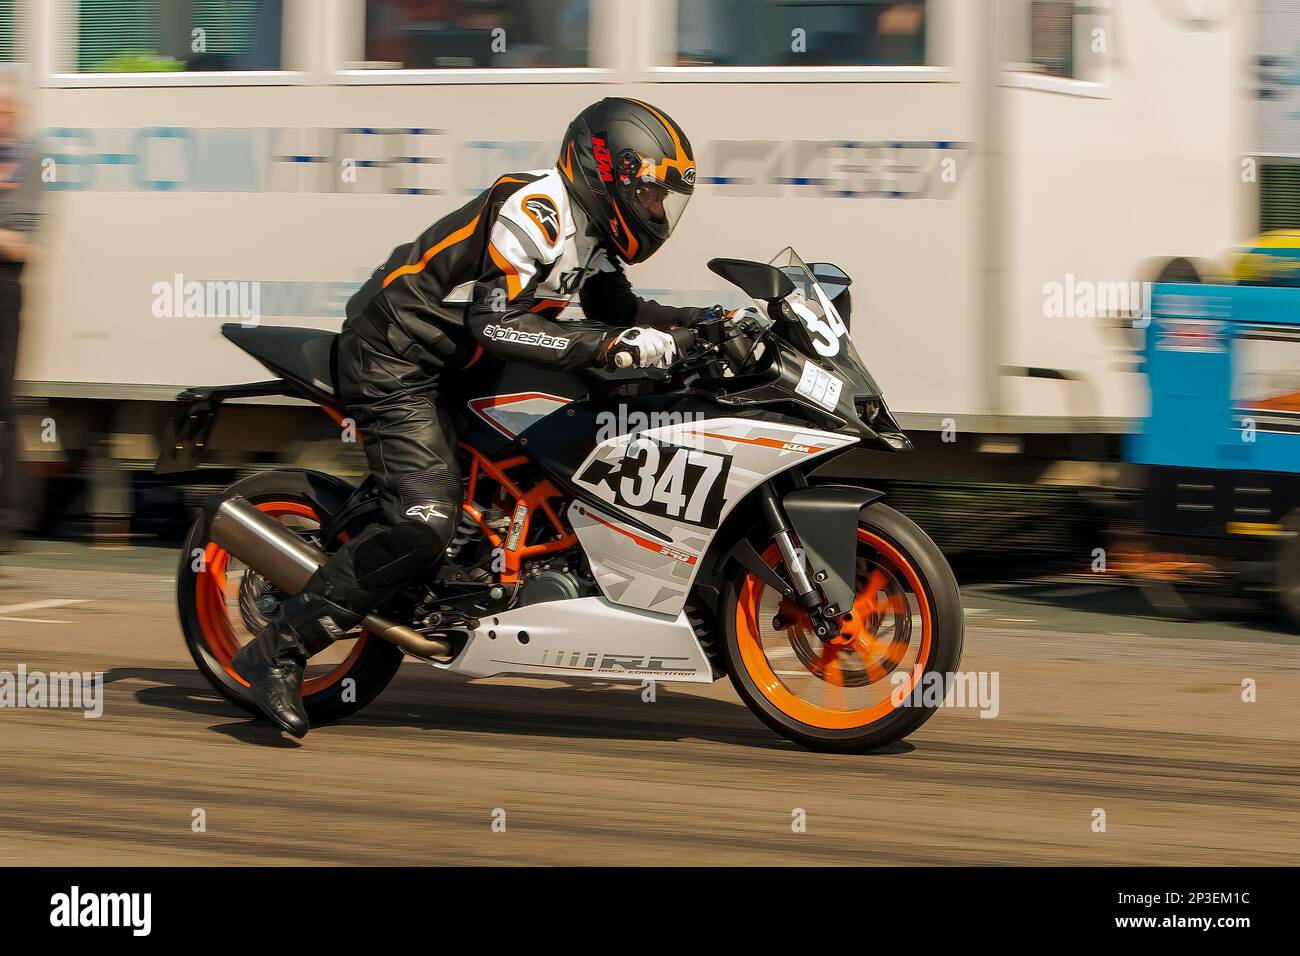 The event is currently run as a quarter mile sprint for both cars and motorcycles, held under the auspices of the Motor Sports Association. This image features Peter Savell riding a KTM R390. The event is organised by the Brighton and Hove Motor Club run along Madeira Drive, Brighton Sea Front, City of Brighton & Hove, UK. 2nd September 2017 Stock Photo